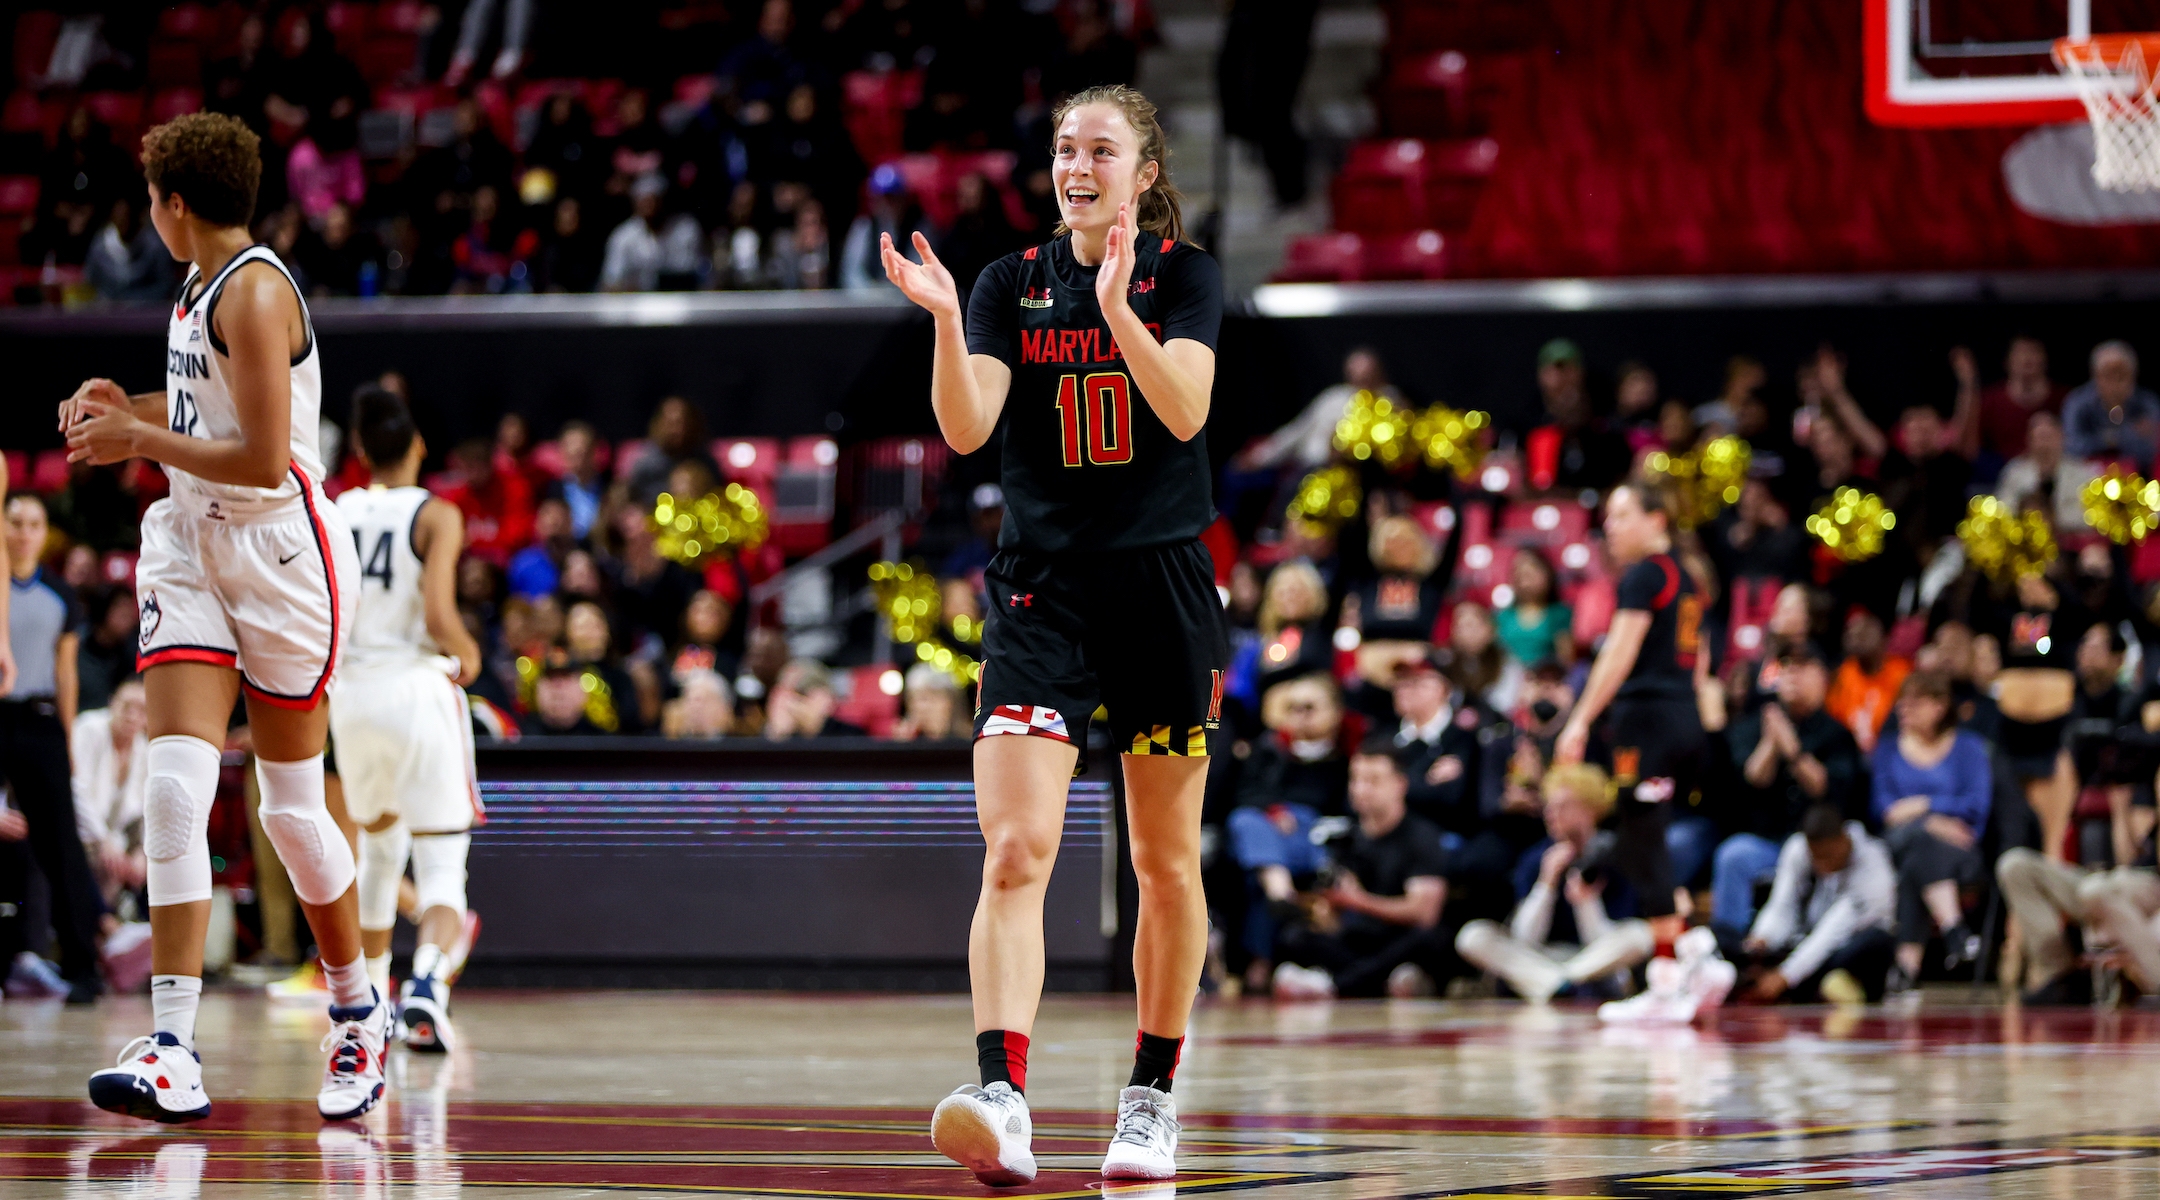 The Jewish Sport Report: Jewish Maryland star Abby Meyers is ready to take on the NCAA tournament